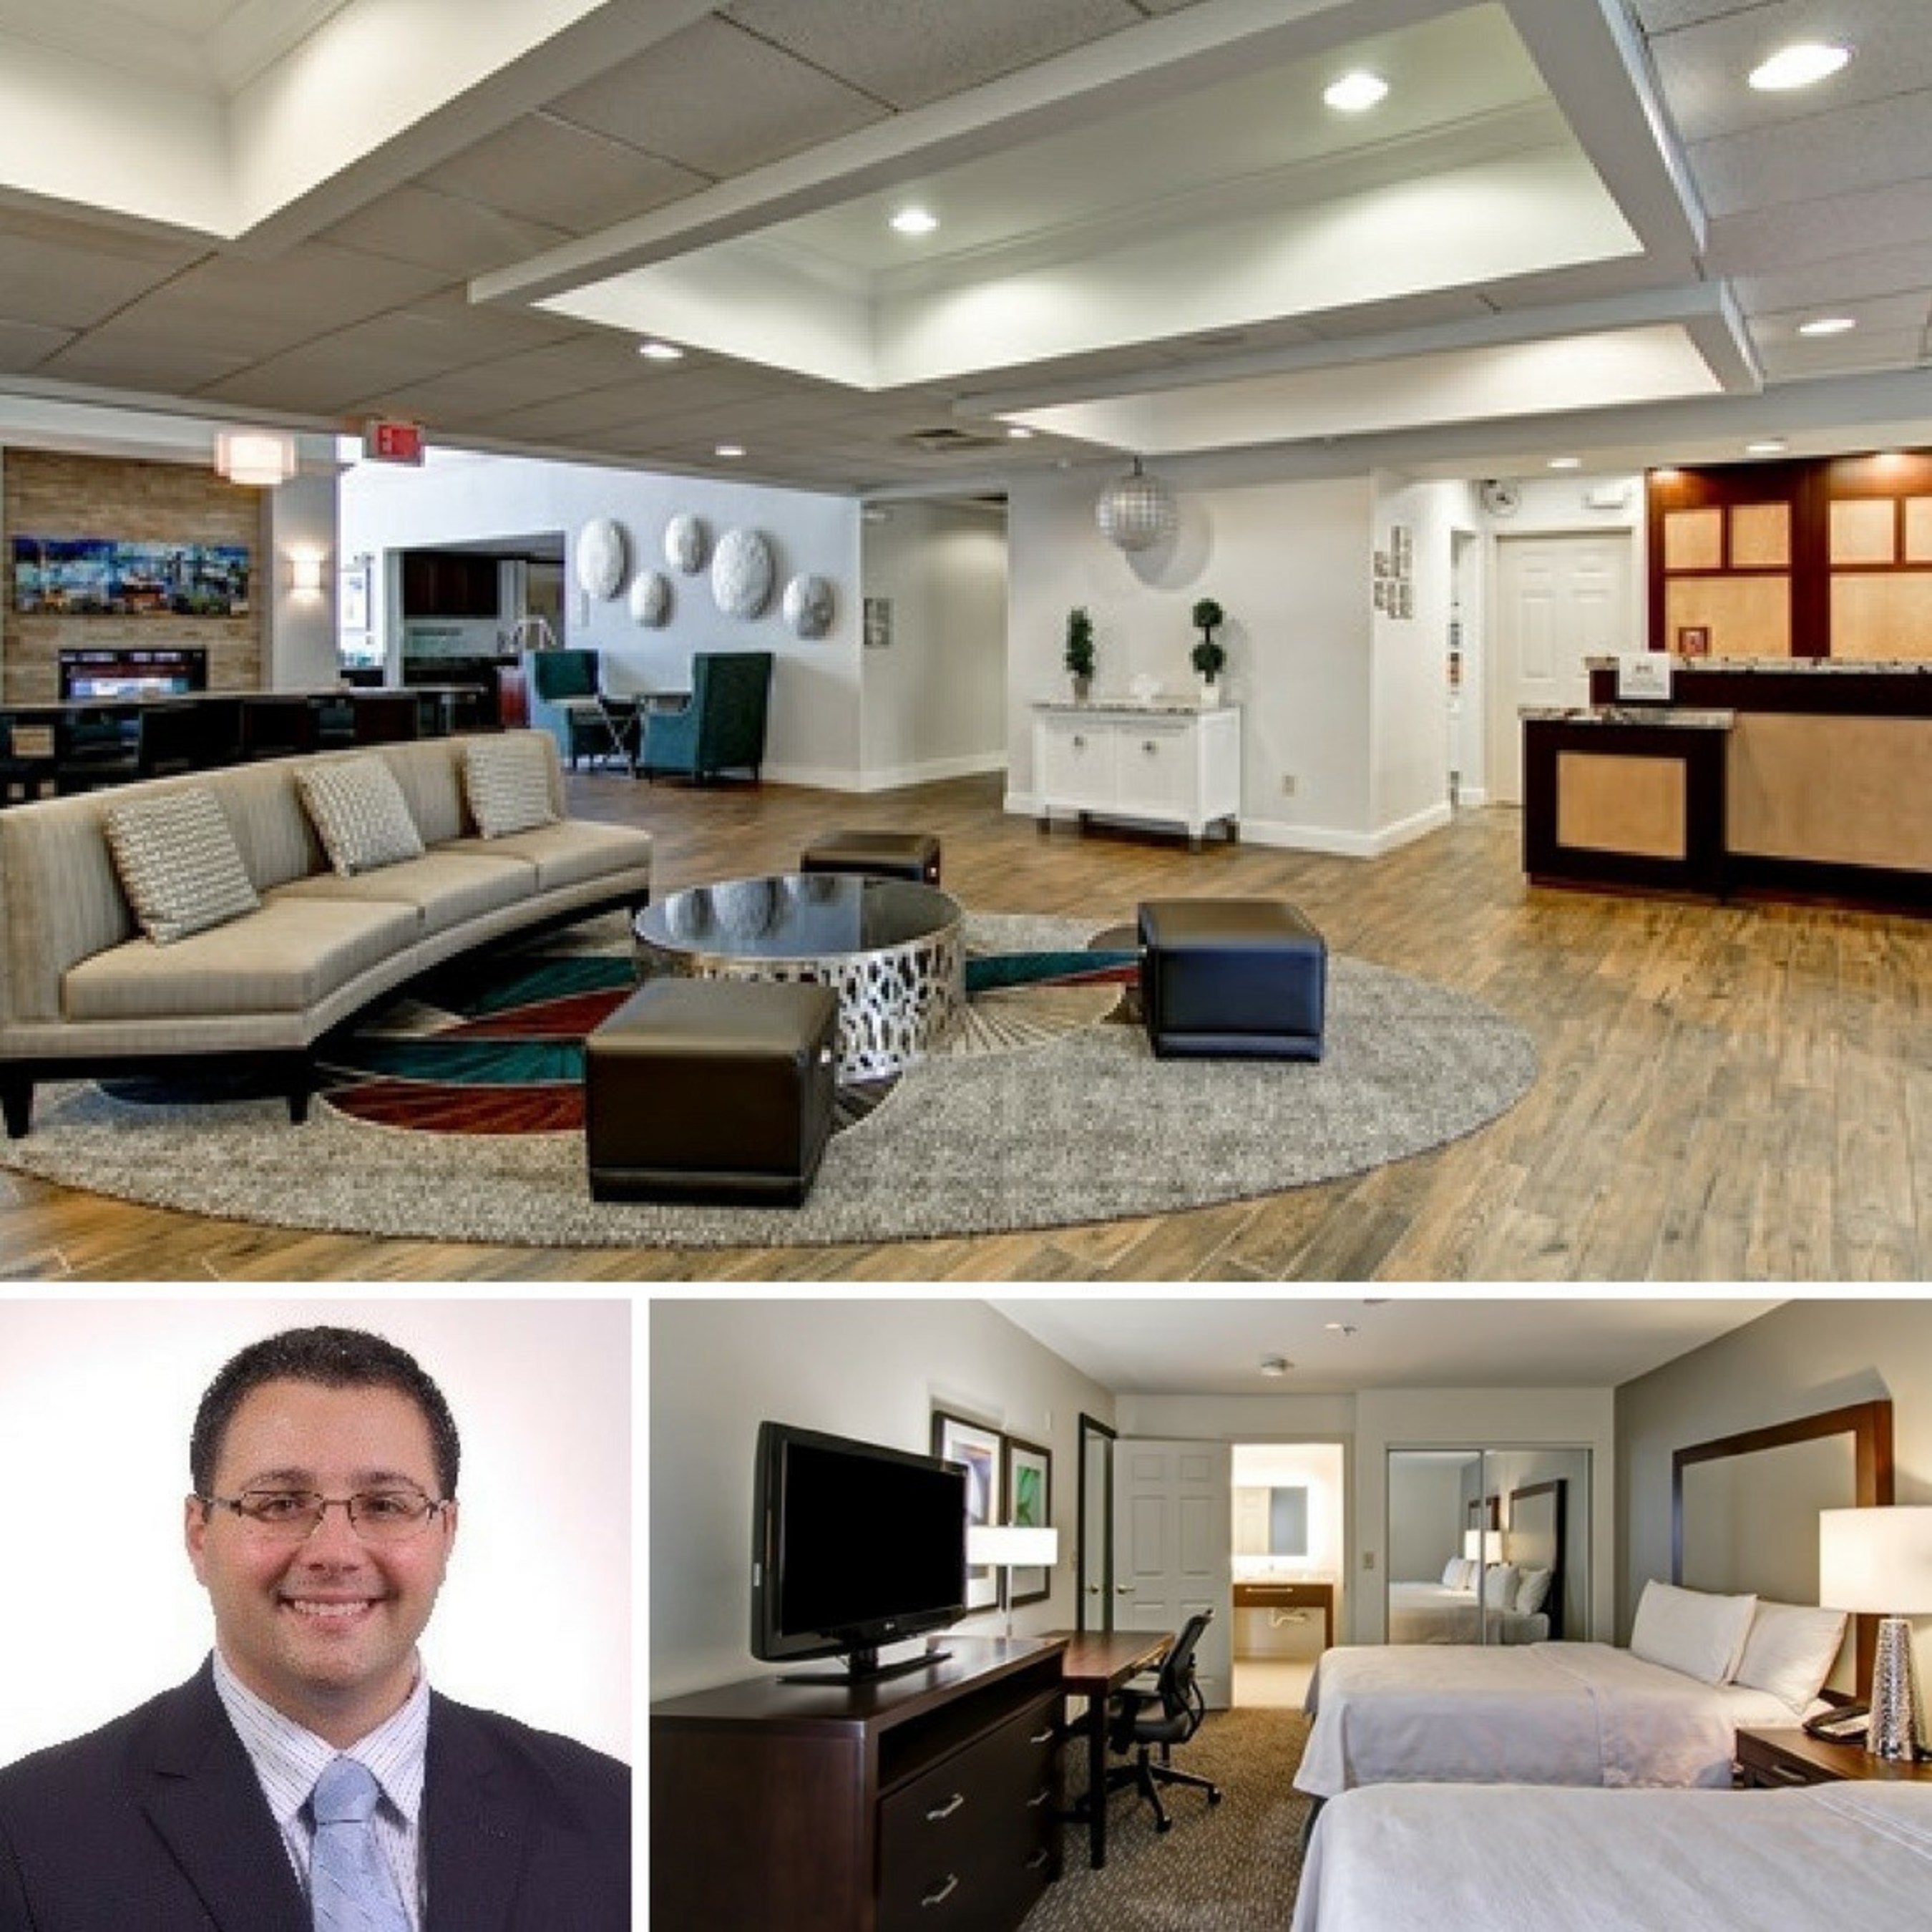 Homewood Suites by Hilton Newark-Cranford, managed by Dimension Development, now has a new general manager, Vinnie Cicerale. The 11-year hospitality veteran had previously served in two roles at the hotel before returning as its leader. With 108 suites catering to corporate travelers along with social, military, educational, religious and fraternal groups, the hotel wrapped up a major renovation project last year that takes it to the next level of at-home comfort. For information, visit http://homewoodsuites3.hilton.com/en/hotels/new-jersey/homewood-suites-by-hilton-newark-cranford-CFDNJHW/index.html or call 1-908-709-1980.